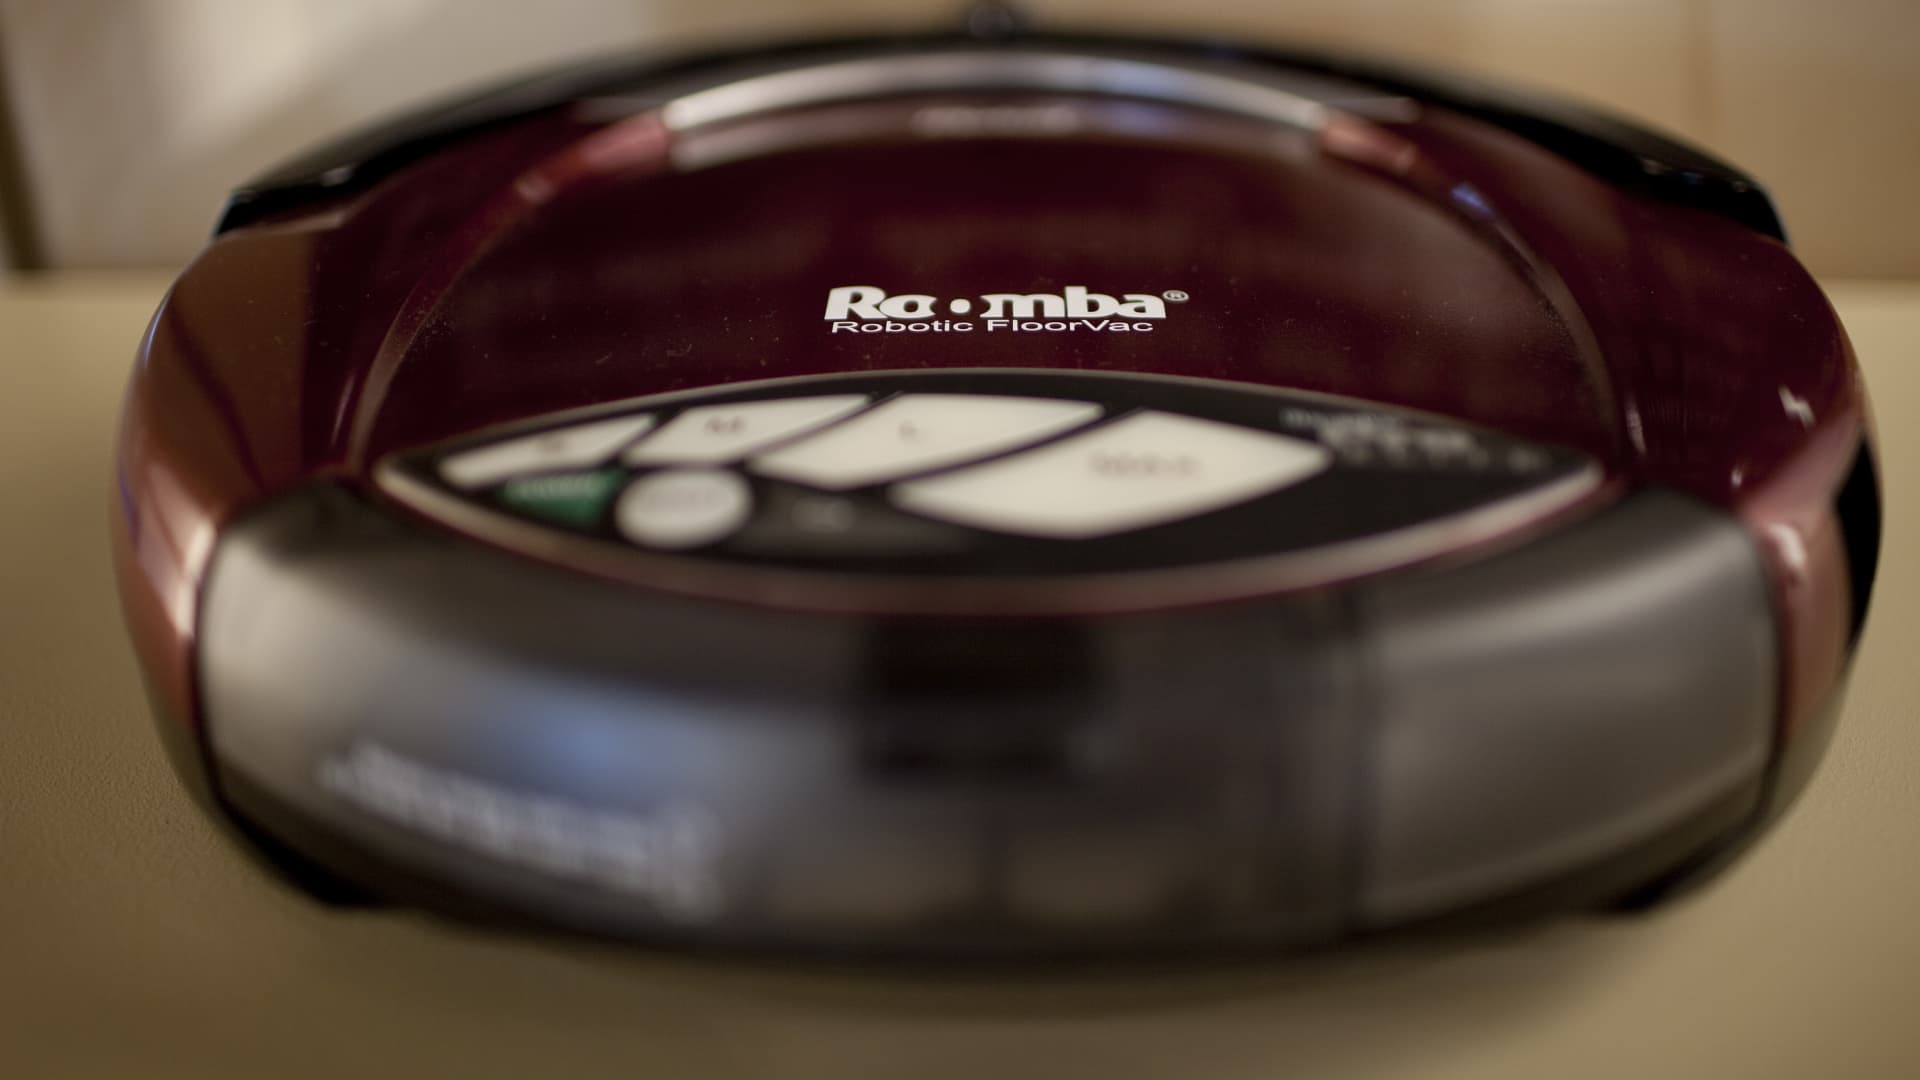 Amazon to acquire maker of Roomba vacuums for roughly $1.7 billion